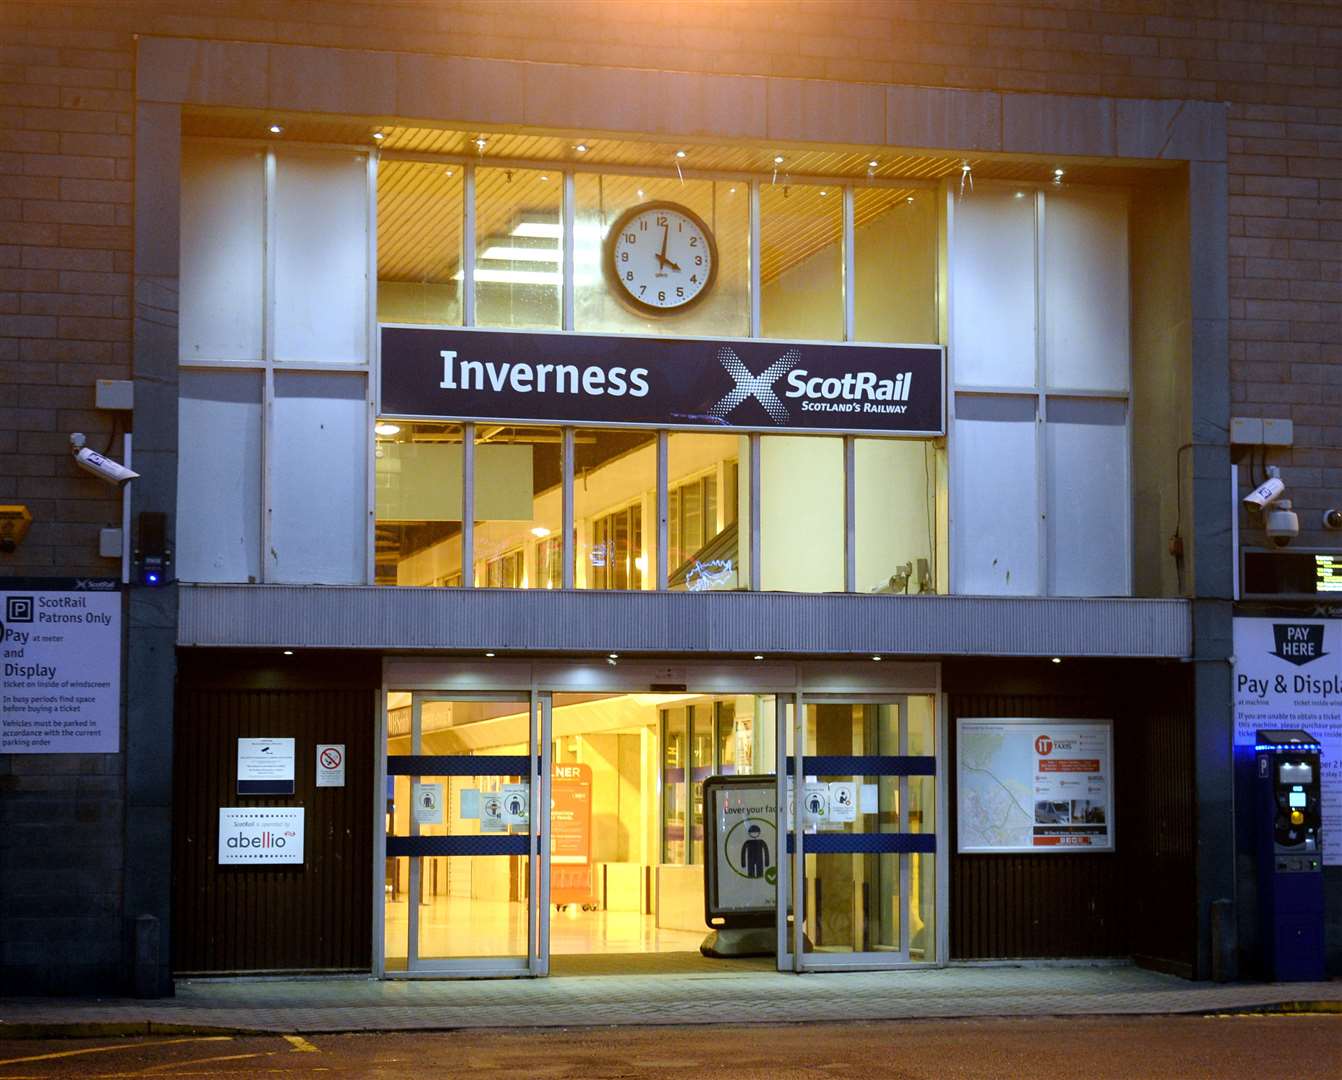 Train services between Inverness and Edinburgh may be delayed this morning.